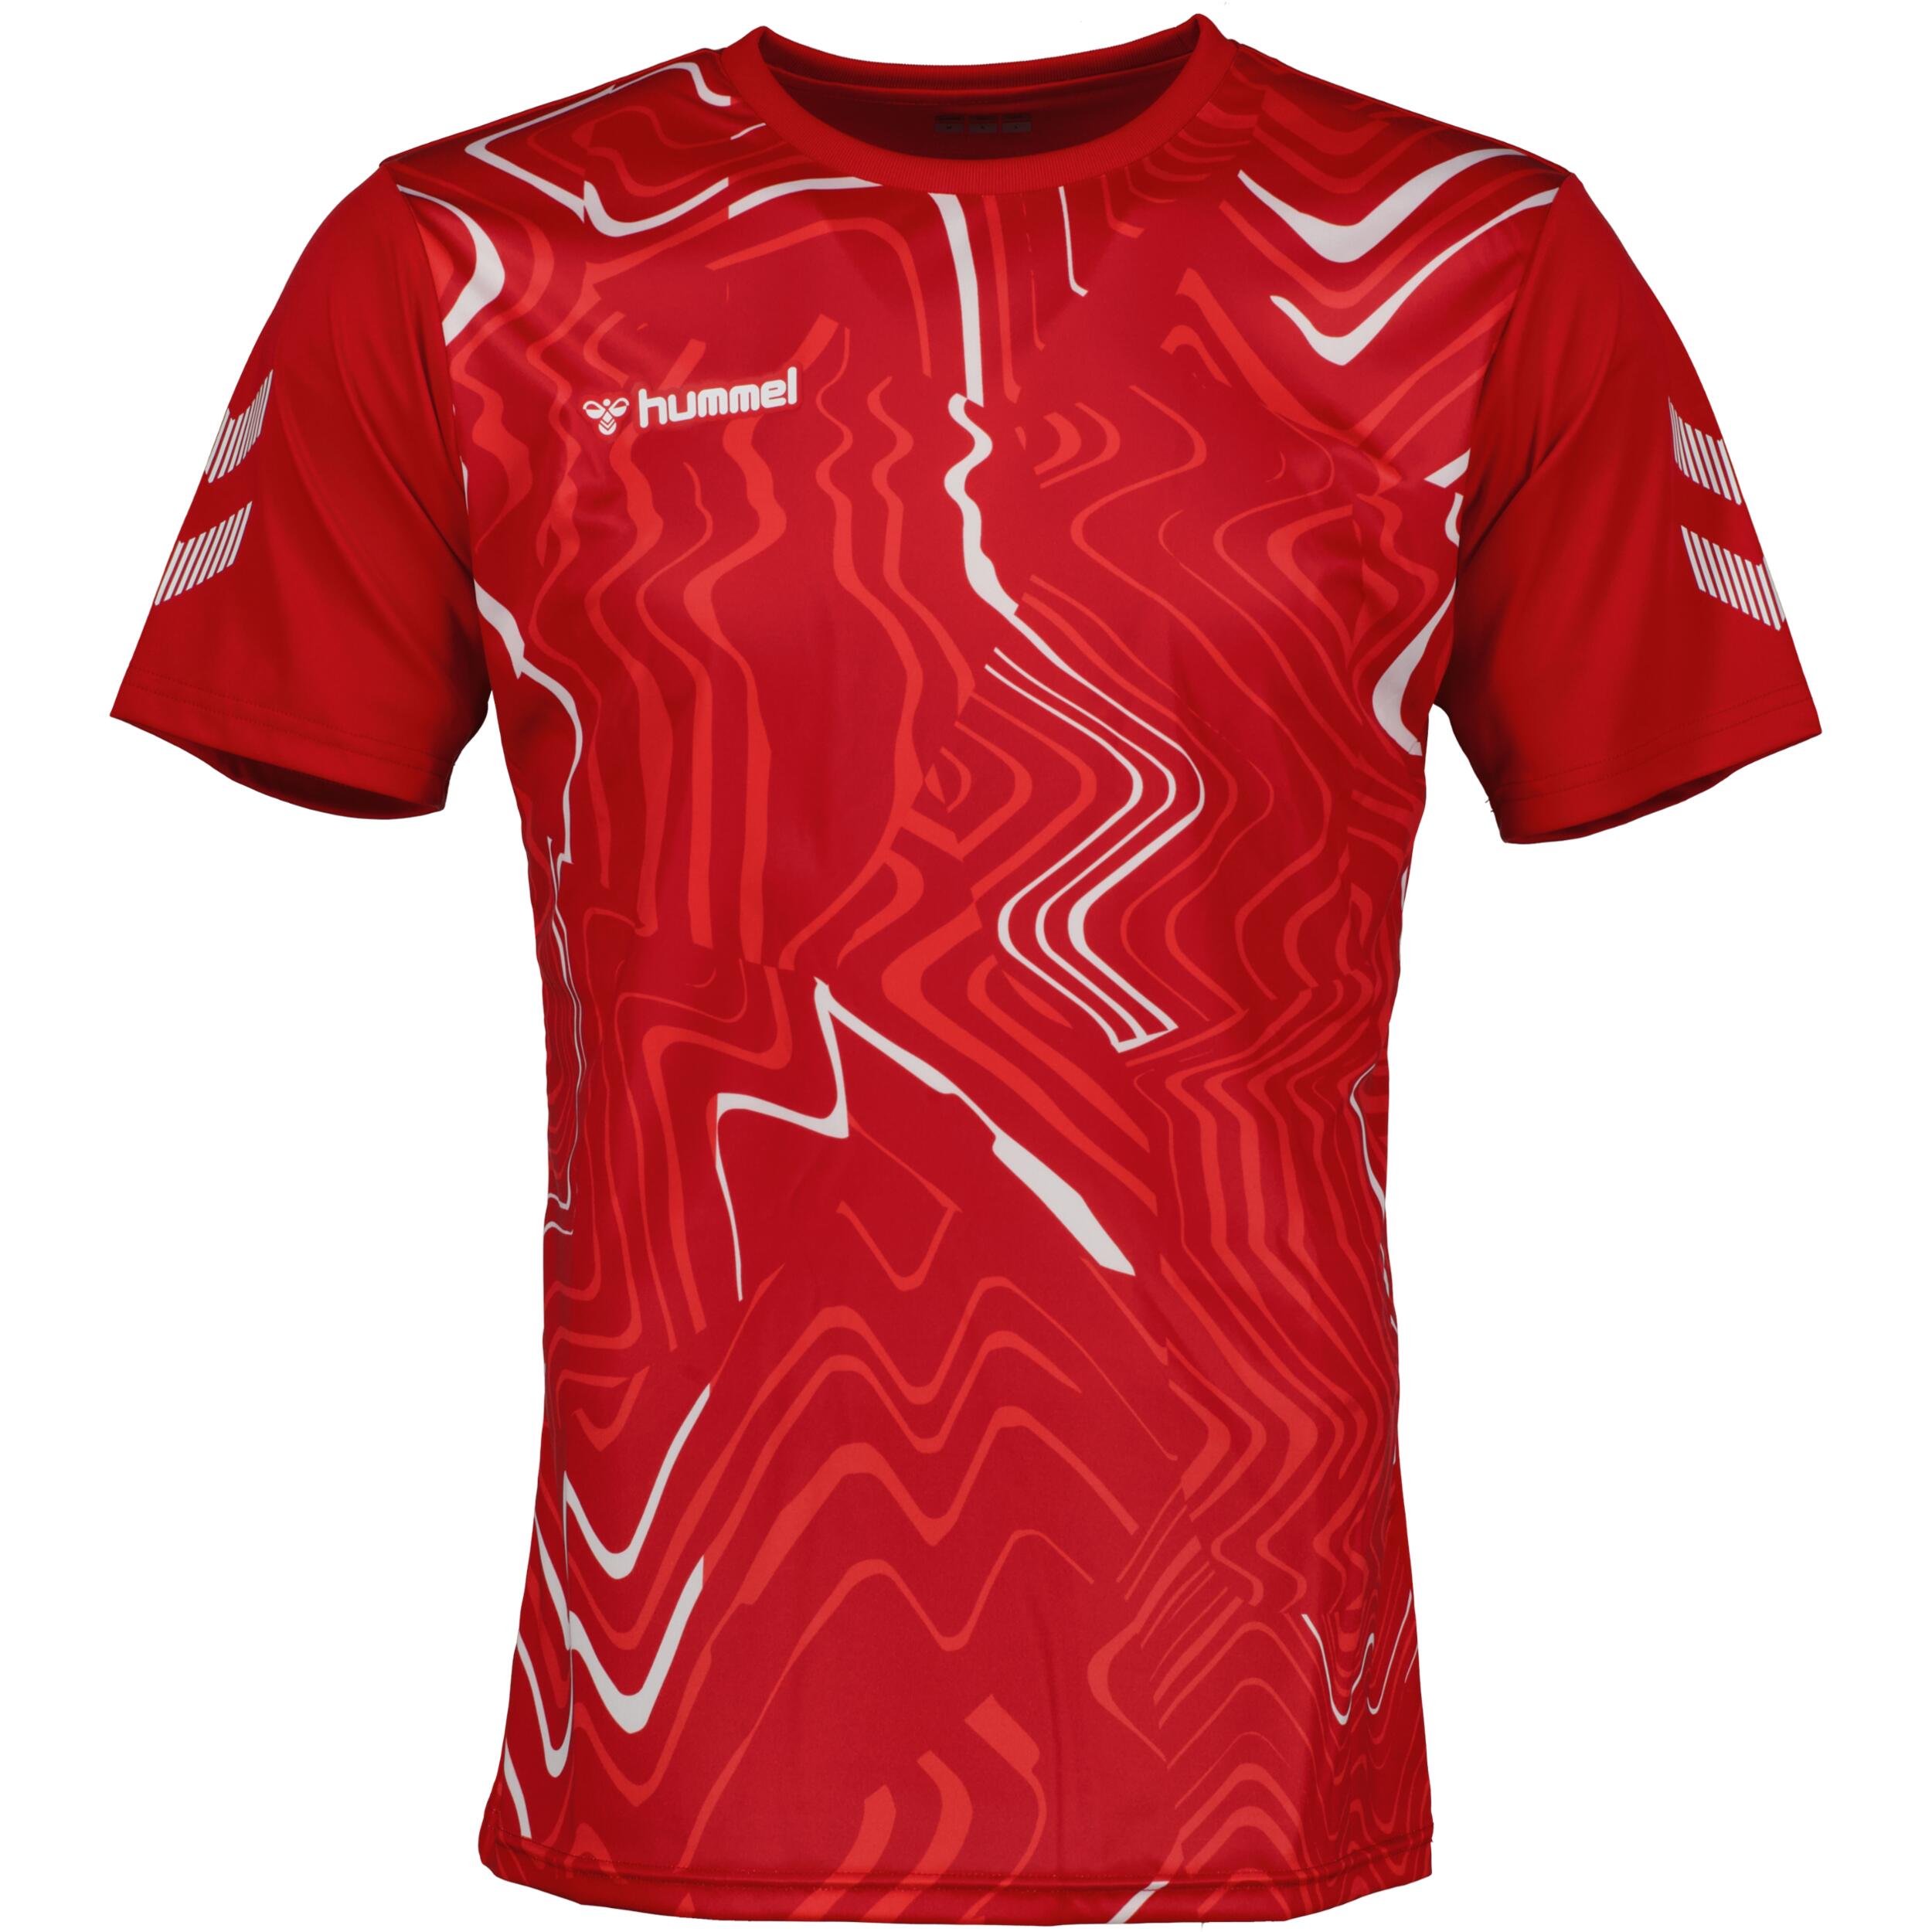 HUMMEL Hydro jersey for kids, great for football, in true red/dark red/white